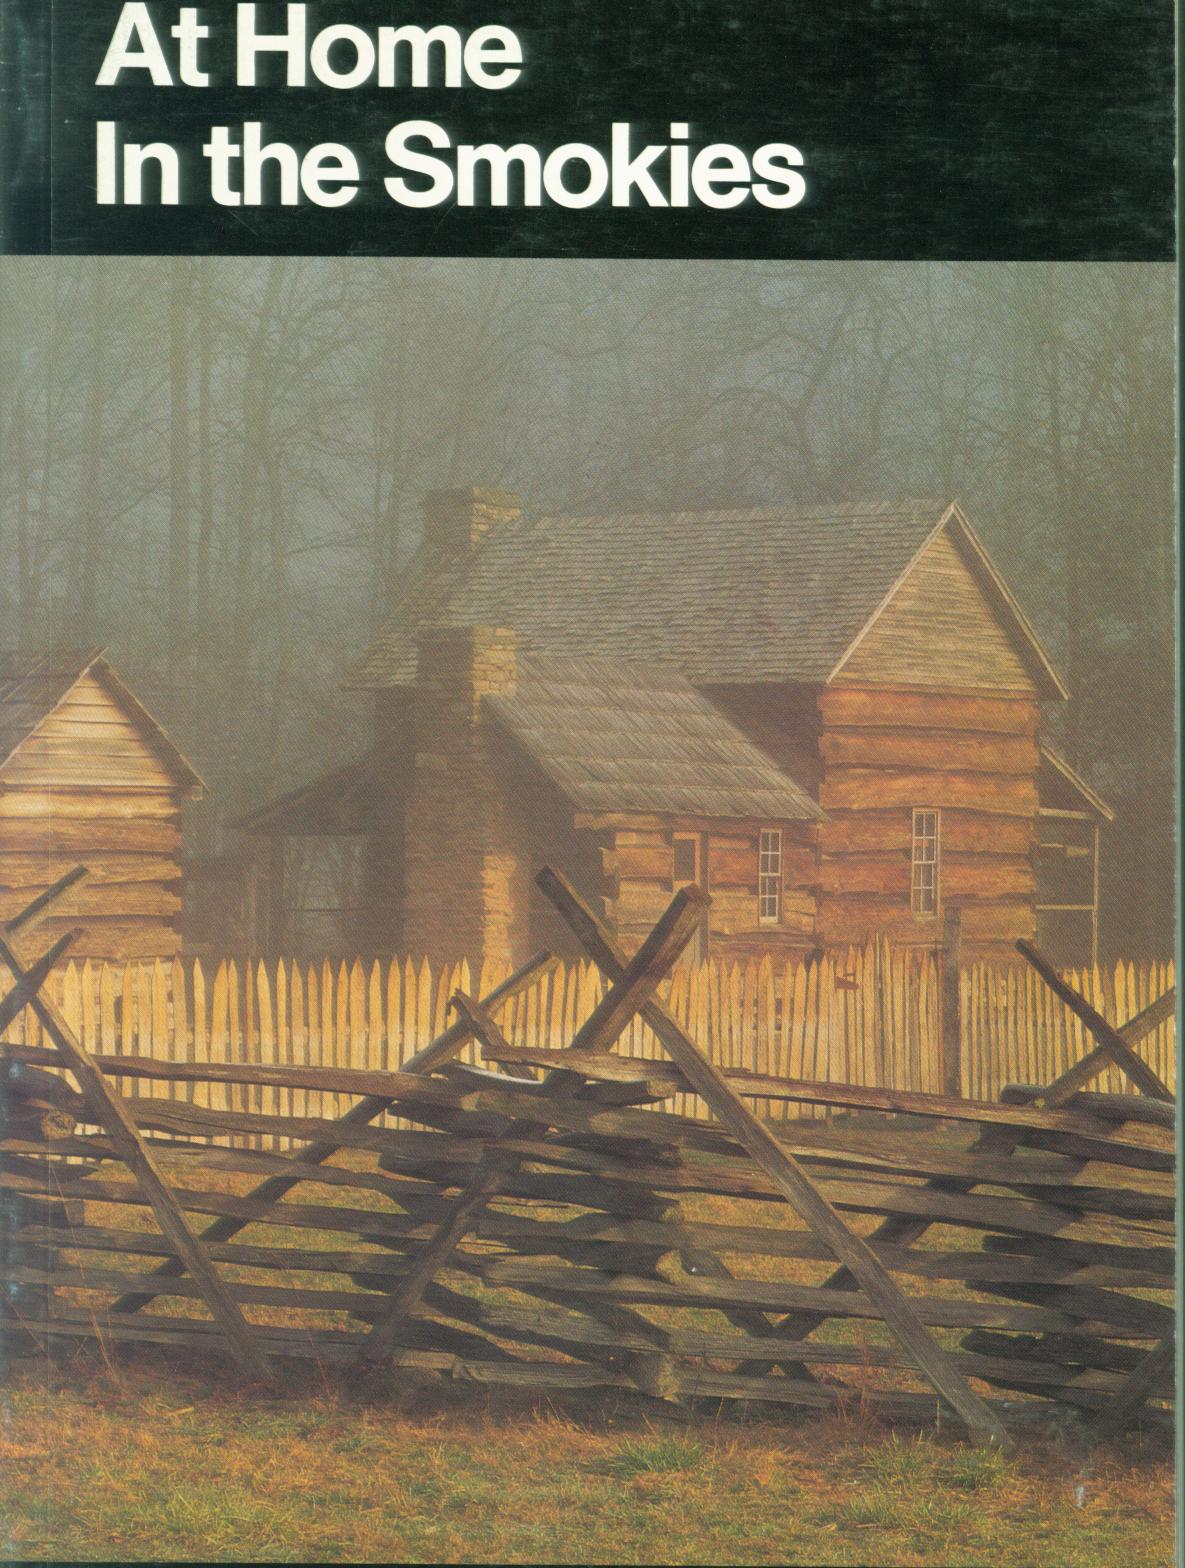 AT HOME IN THE SMOKIES: a history handbook for Great Smoky Mountains National Park. 